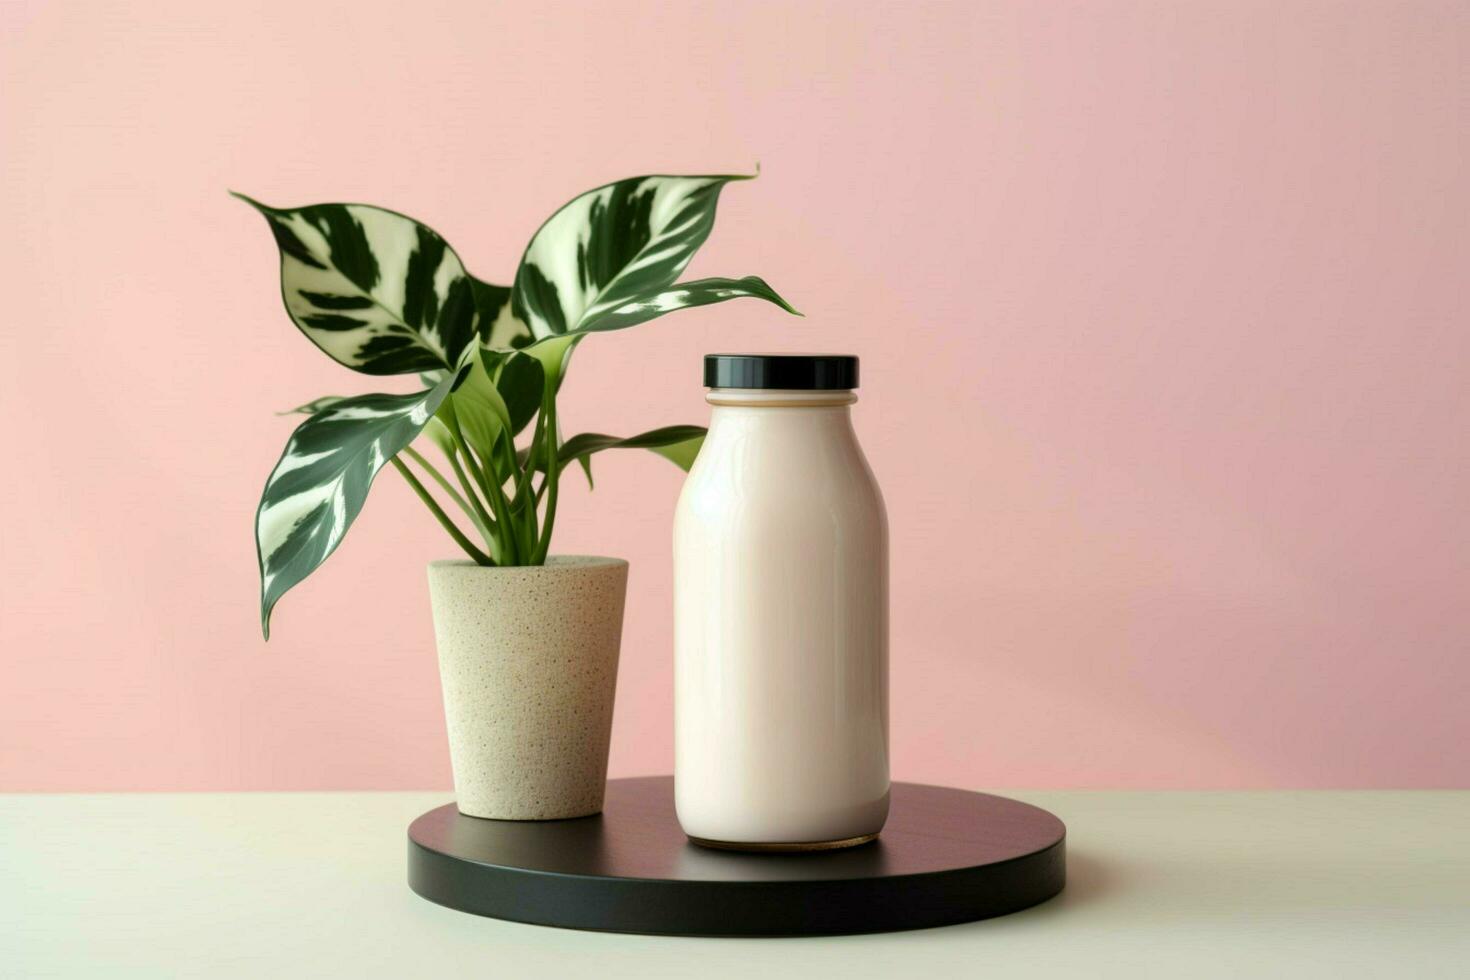 a bottle of milk with a black cap sits on a pink photo